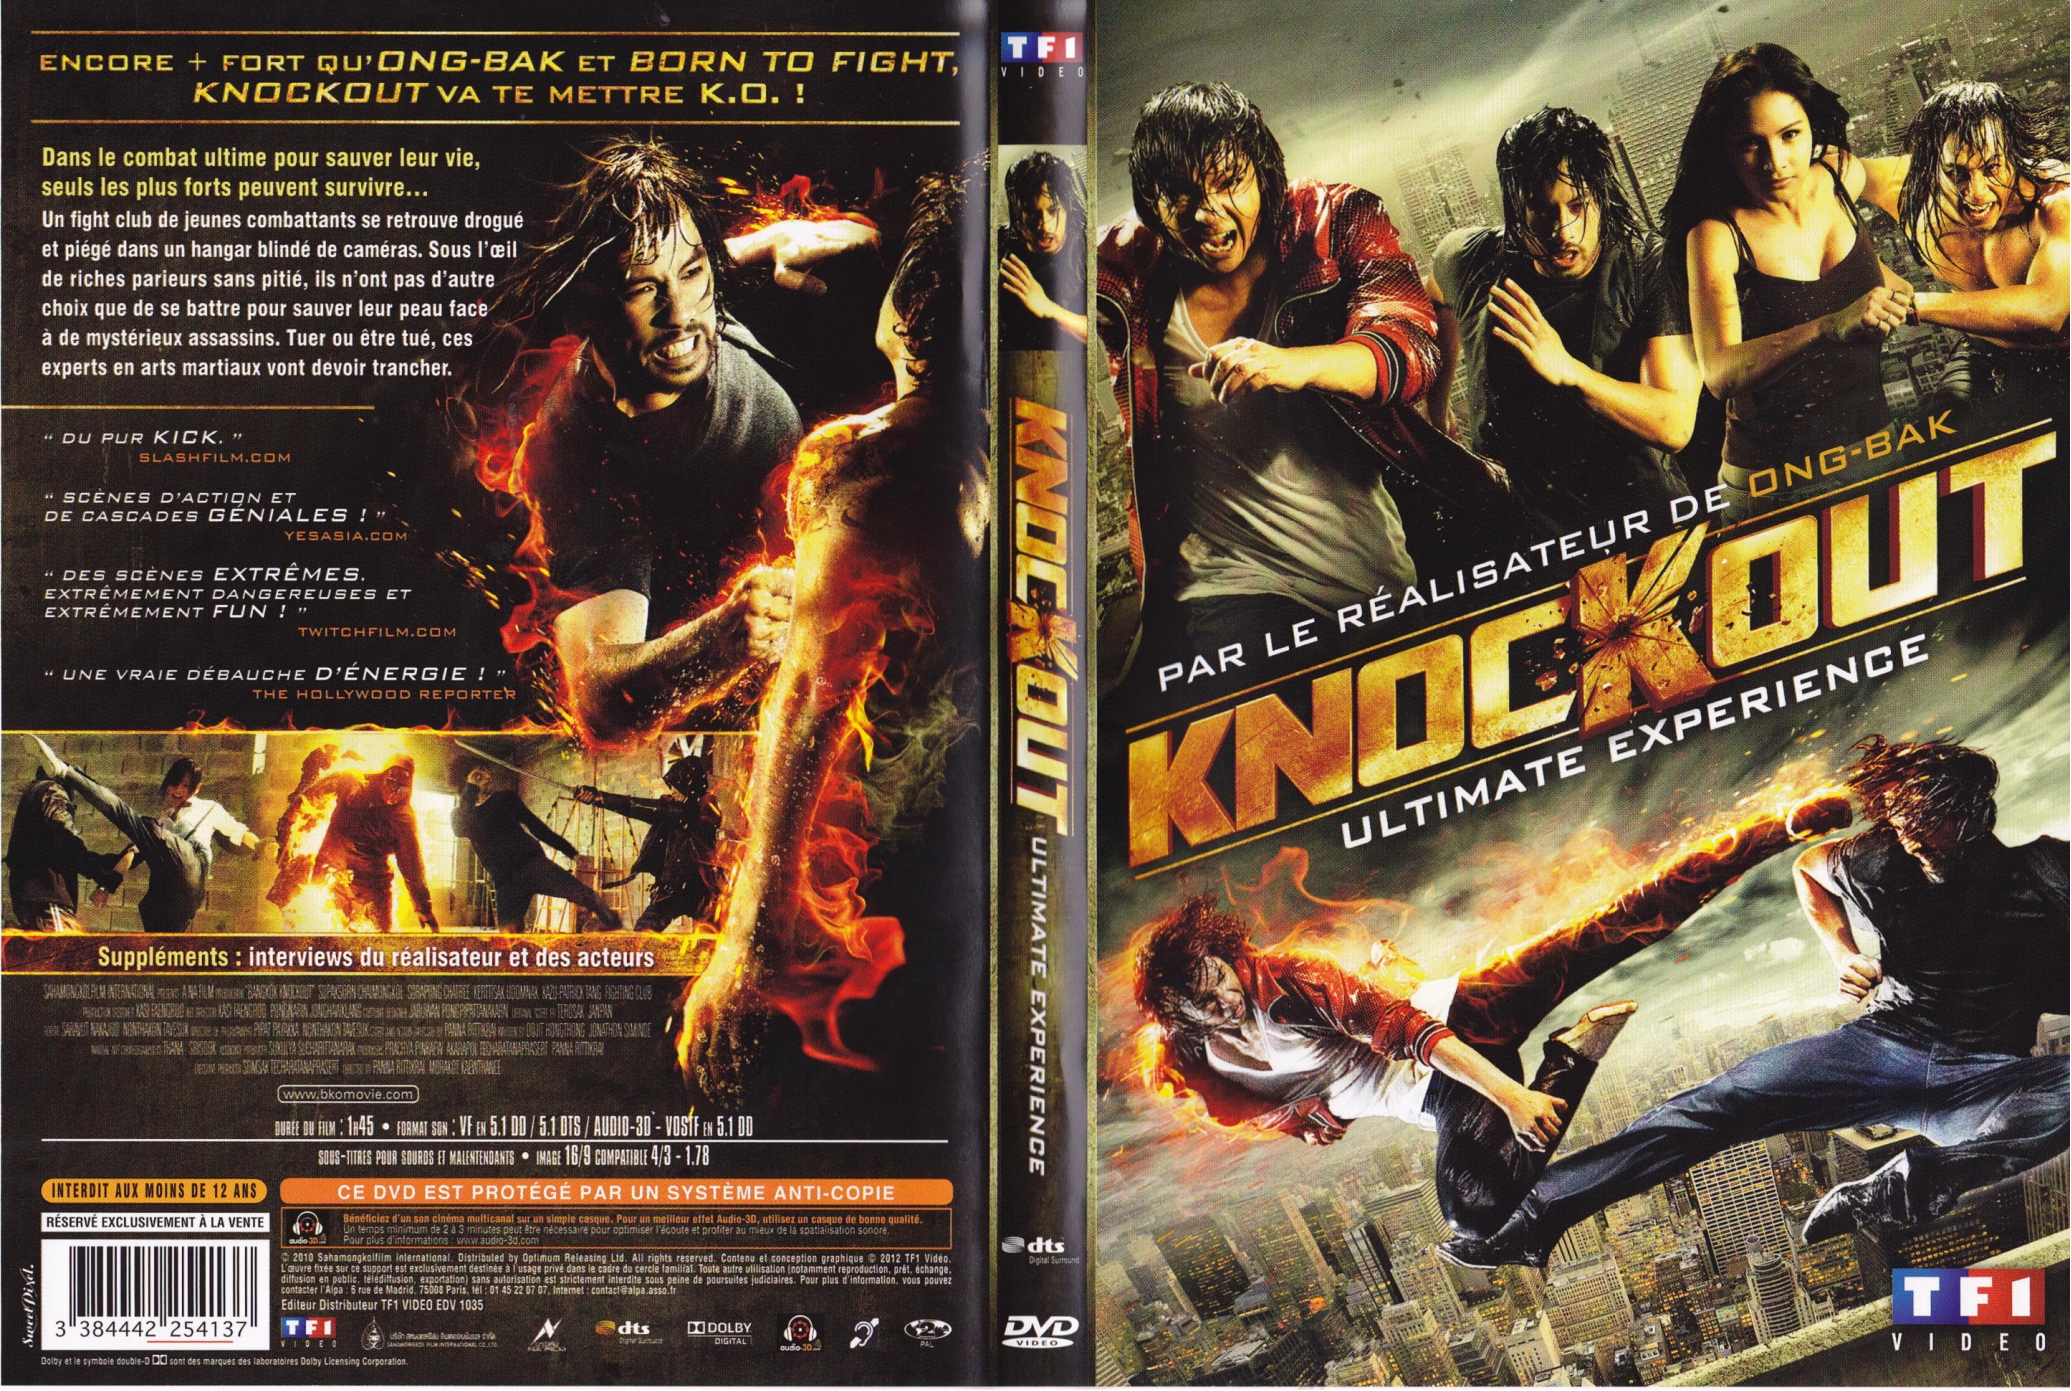 Jaquette DVD Knockout Ultimate Experience